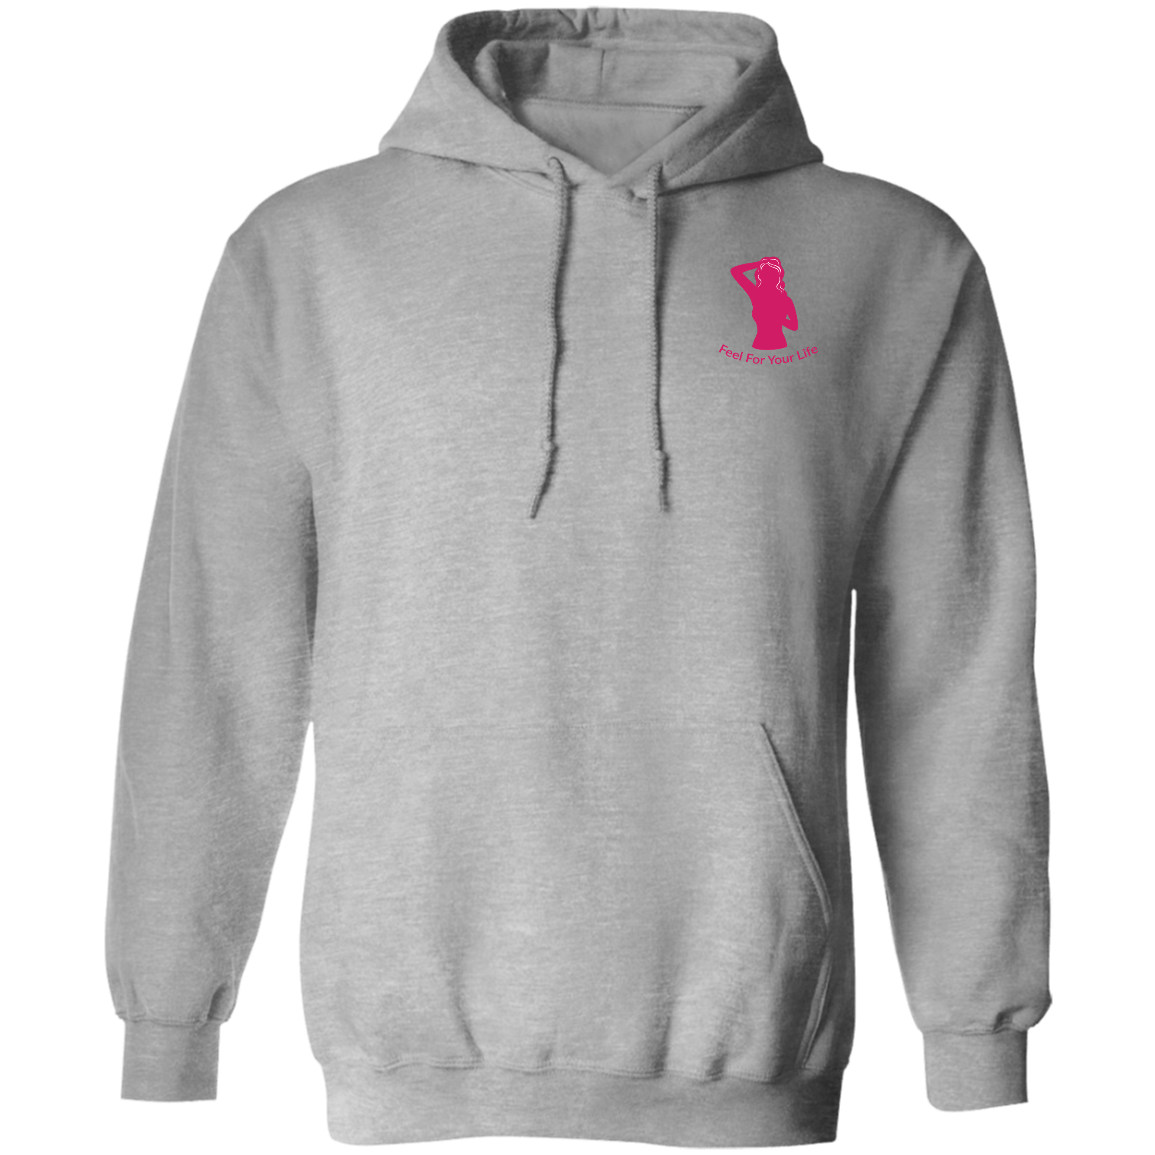 Feel For Your Life Unisex Hoodie Dark Gray w/ Hot Pink Logo Small